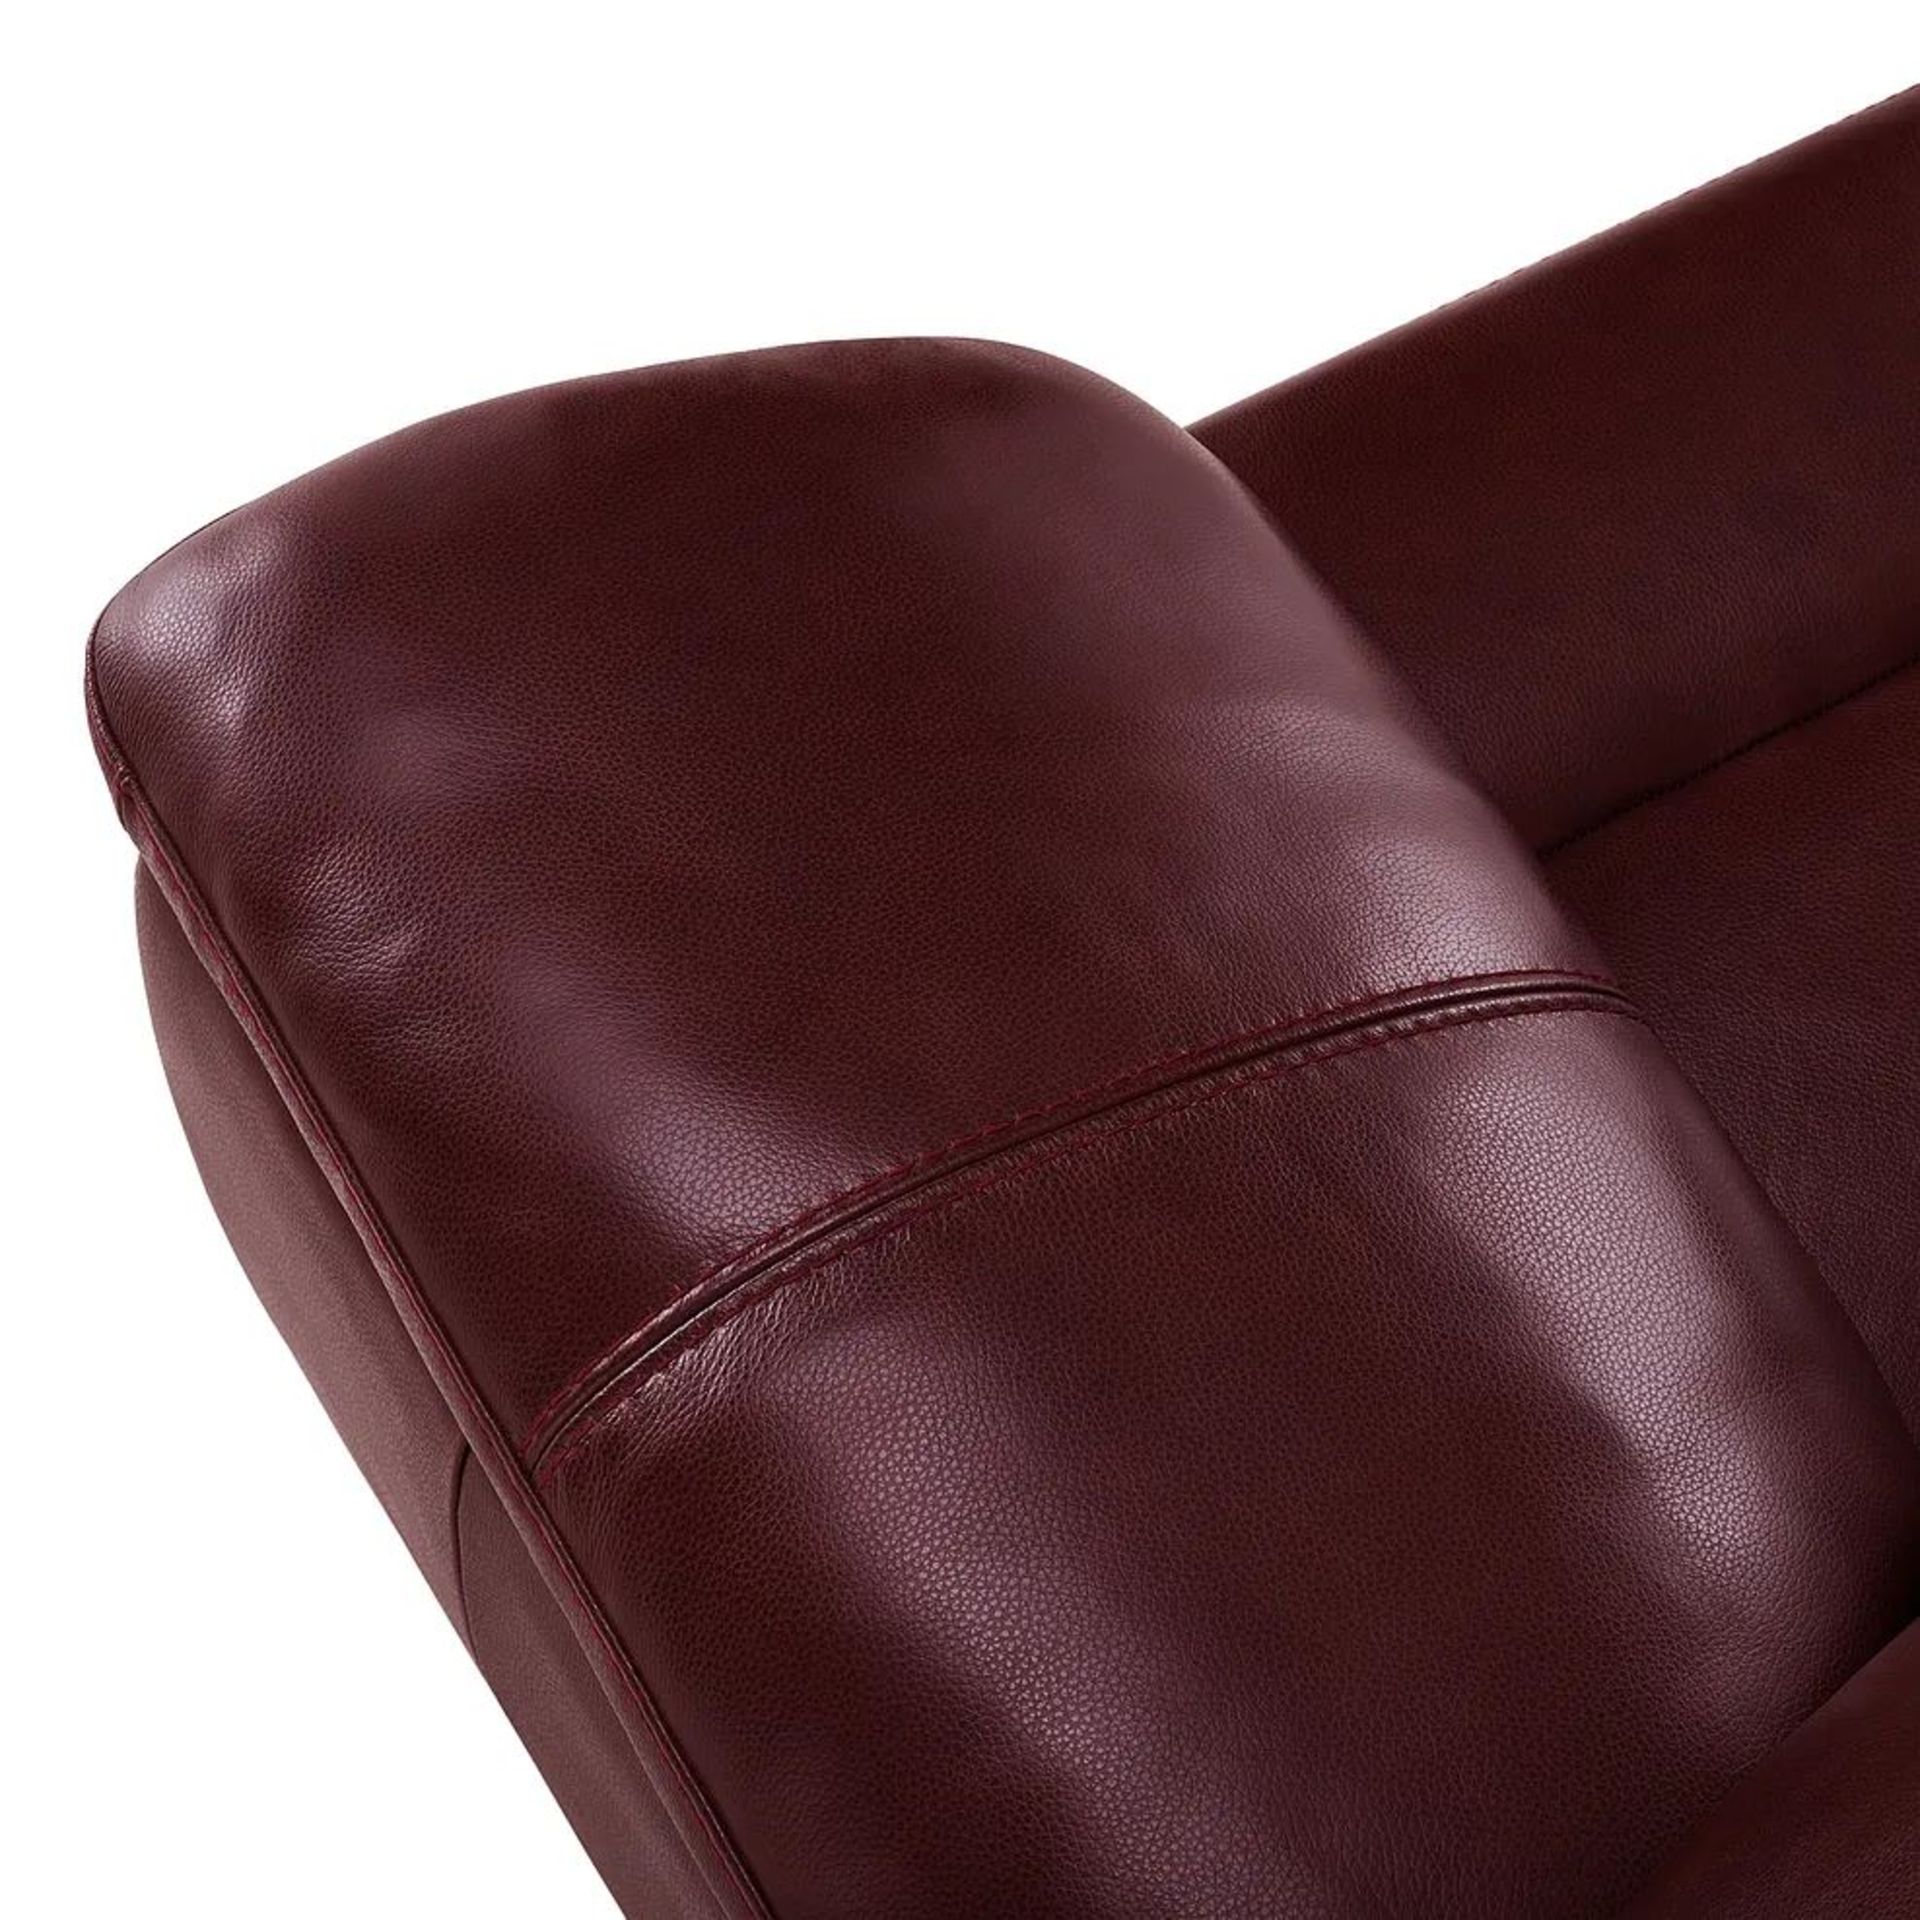 BRAND NEW ARLINGTON Electric Recliner Armchair - BURGANDY LEATHER. RRP £1199. Create a traditional - Image 11 of 12